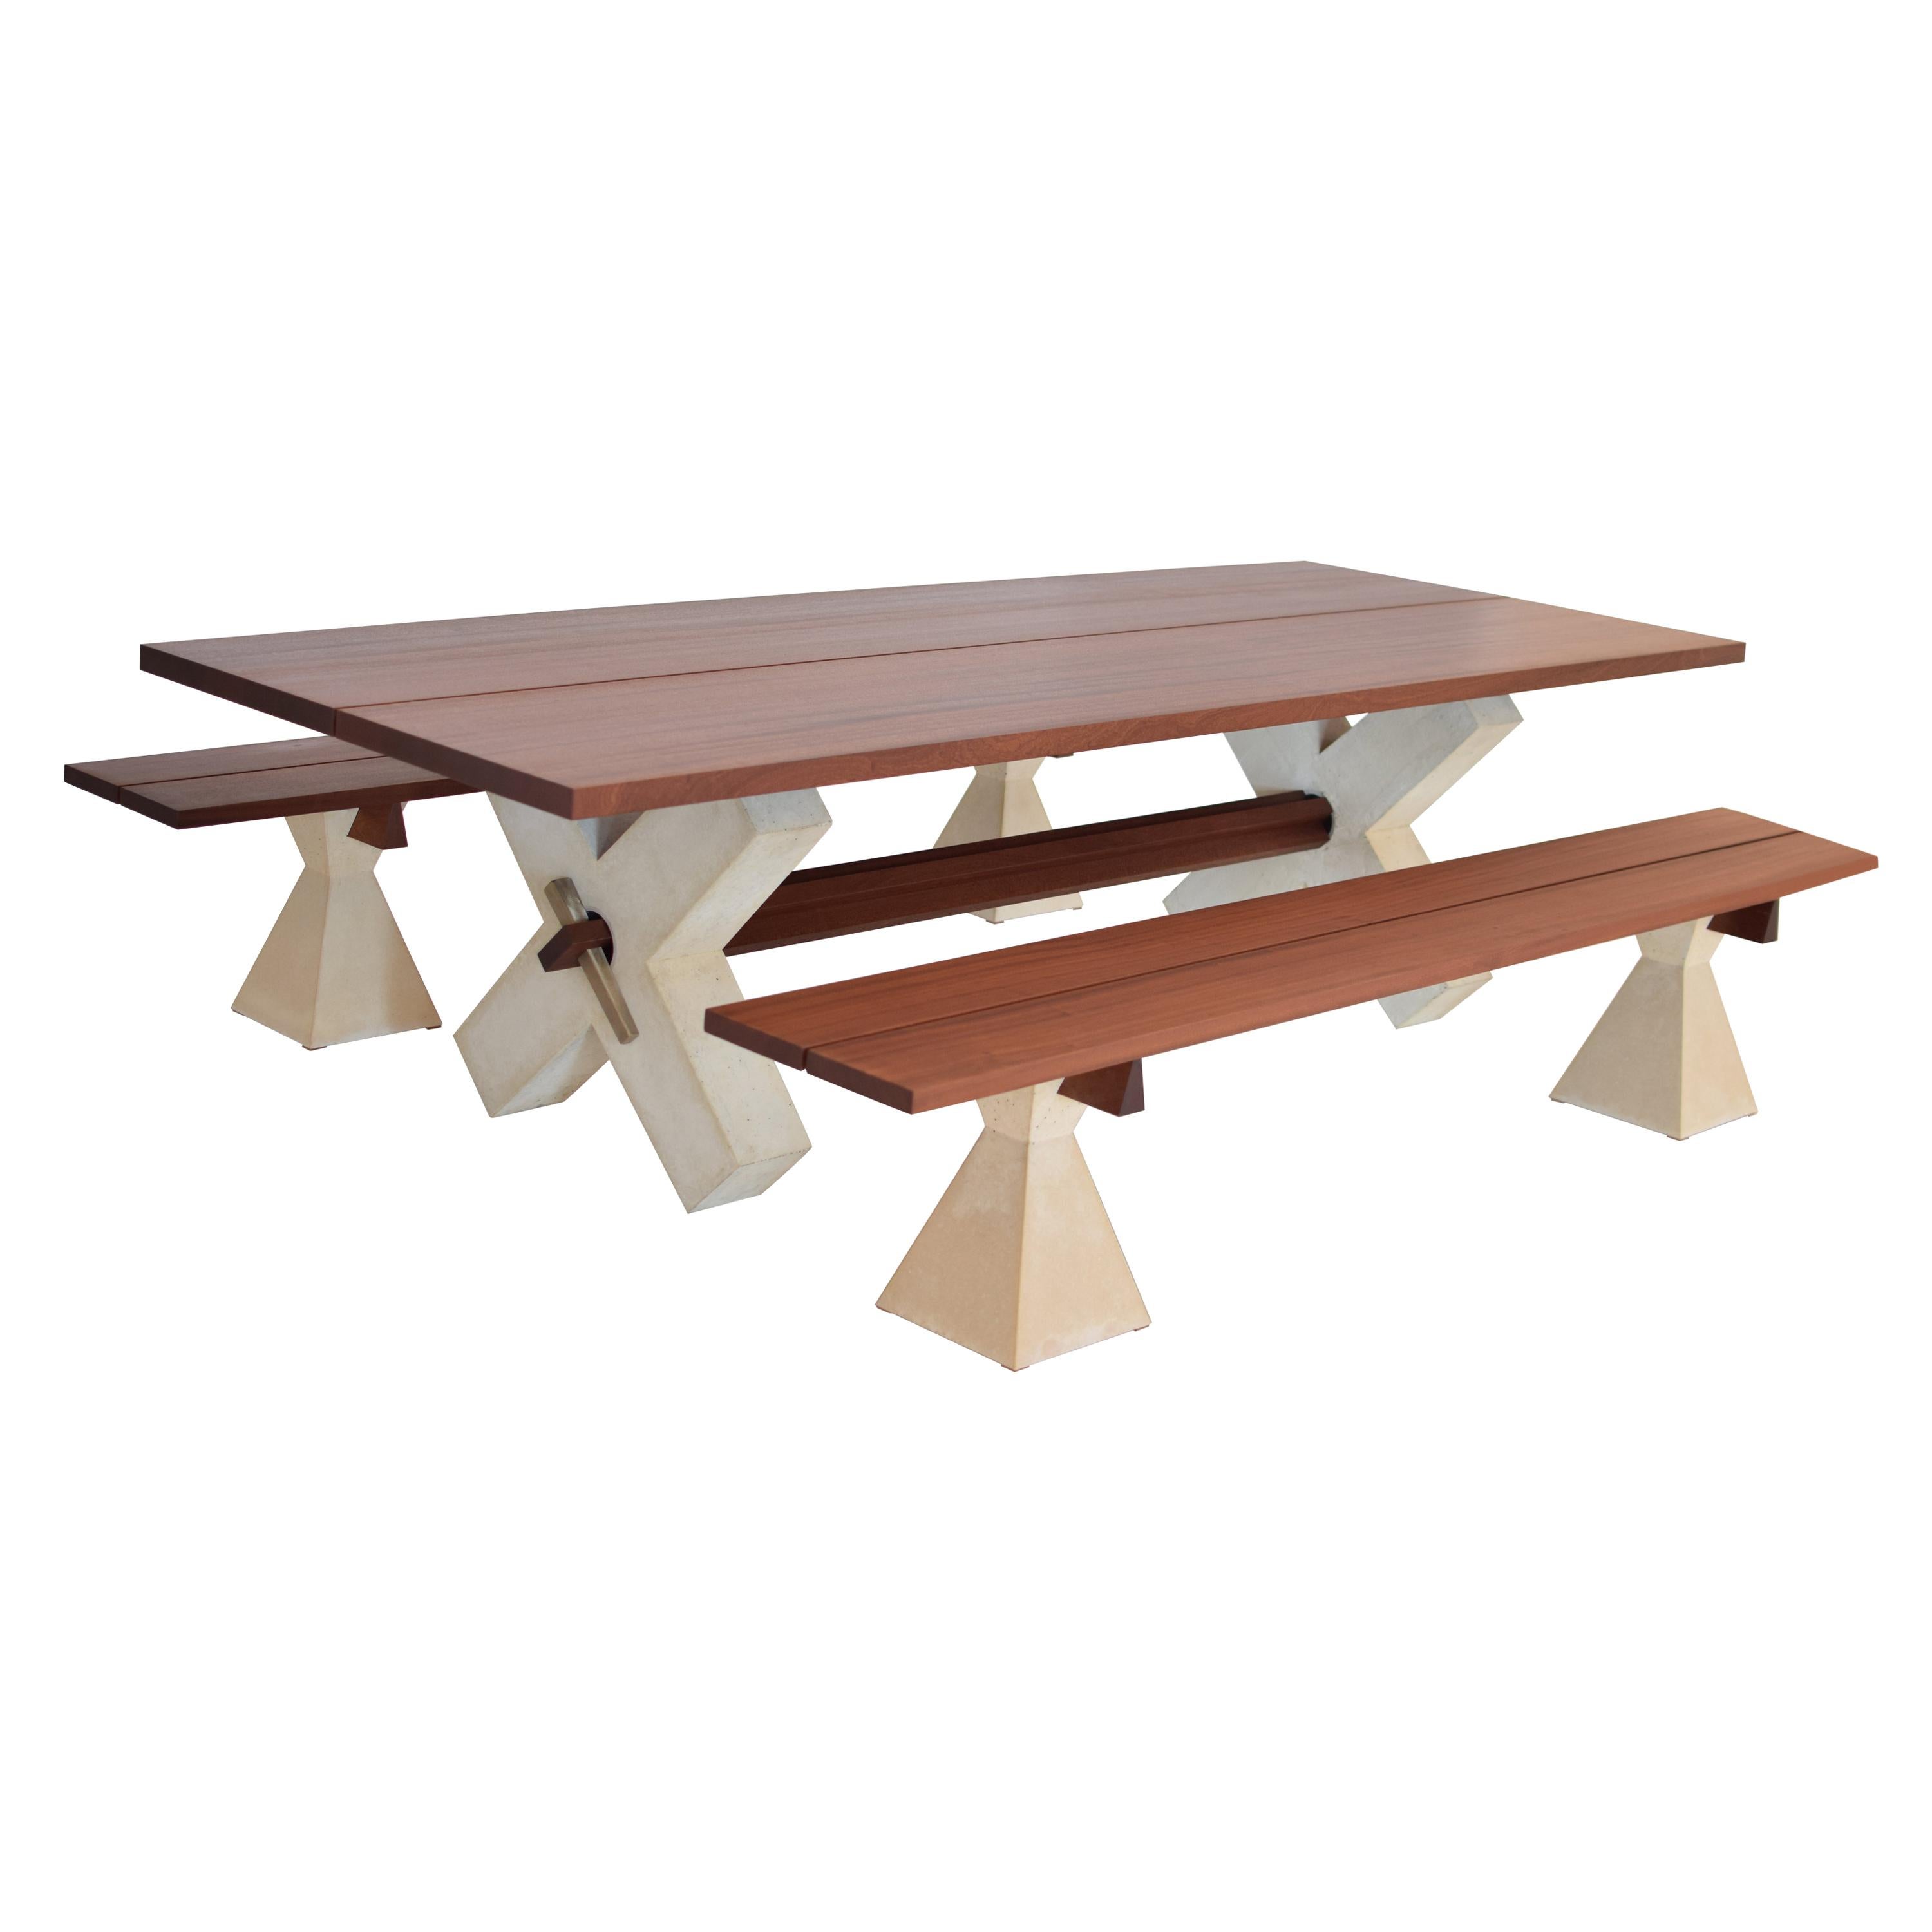 Modern Wood and Concrete Dining Table Set with Benches